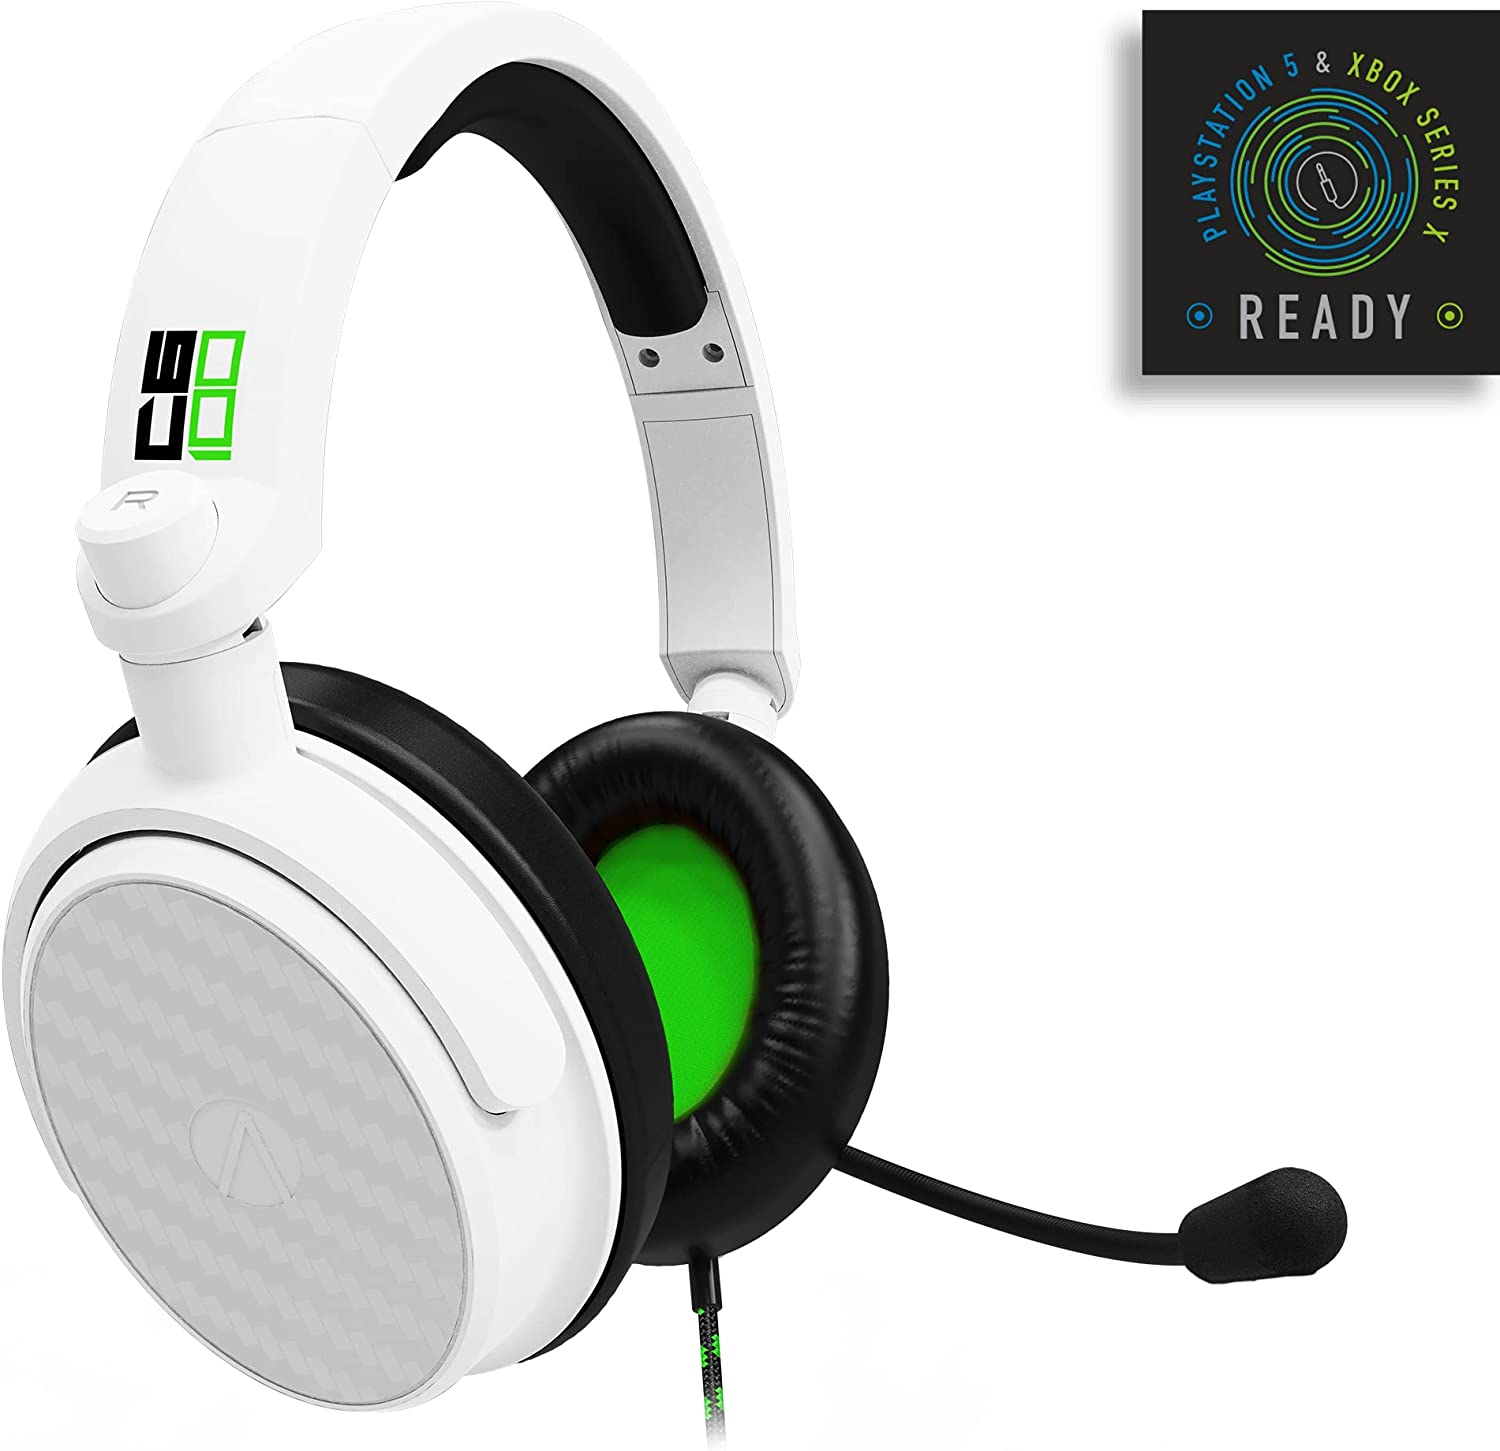 Stealth C6-100 Stereo Gaming Headset - Green